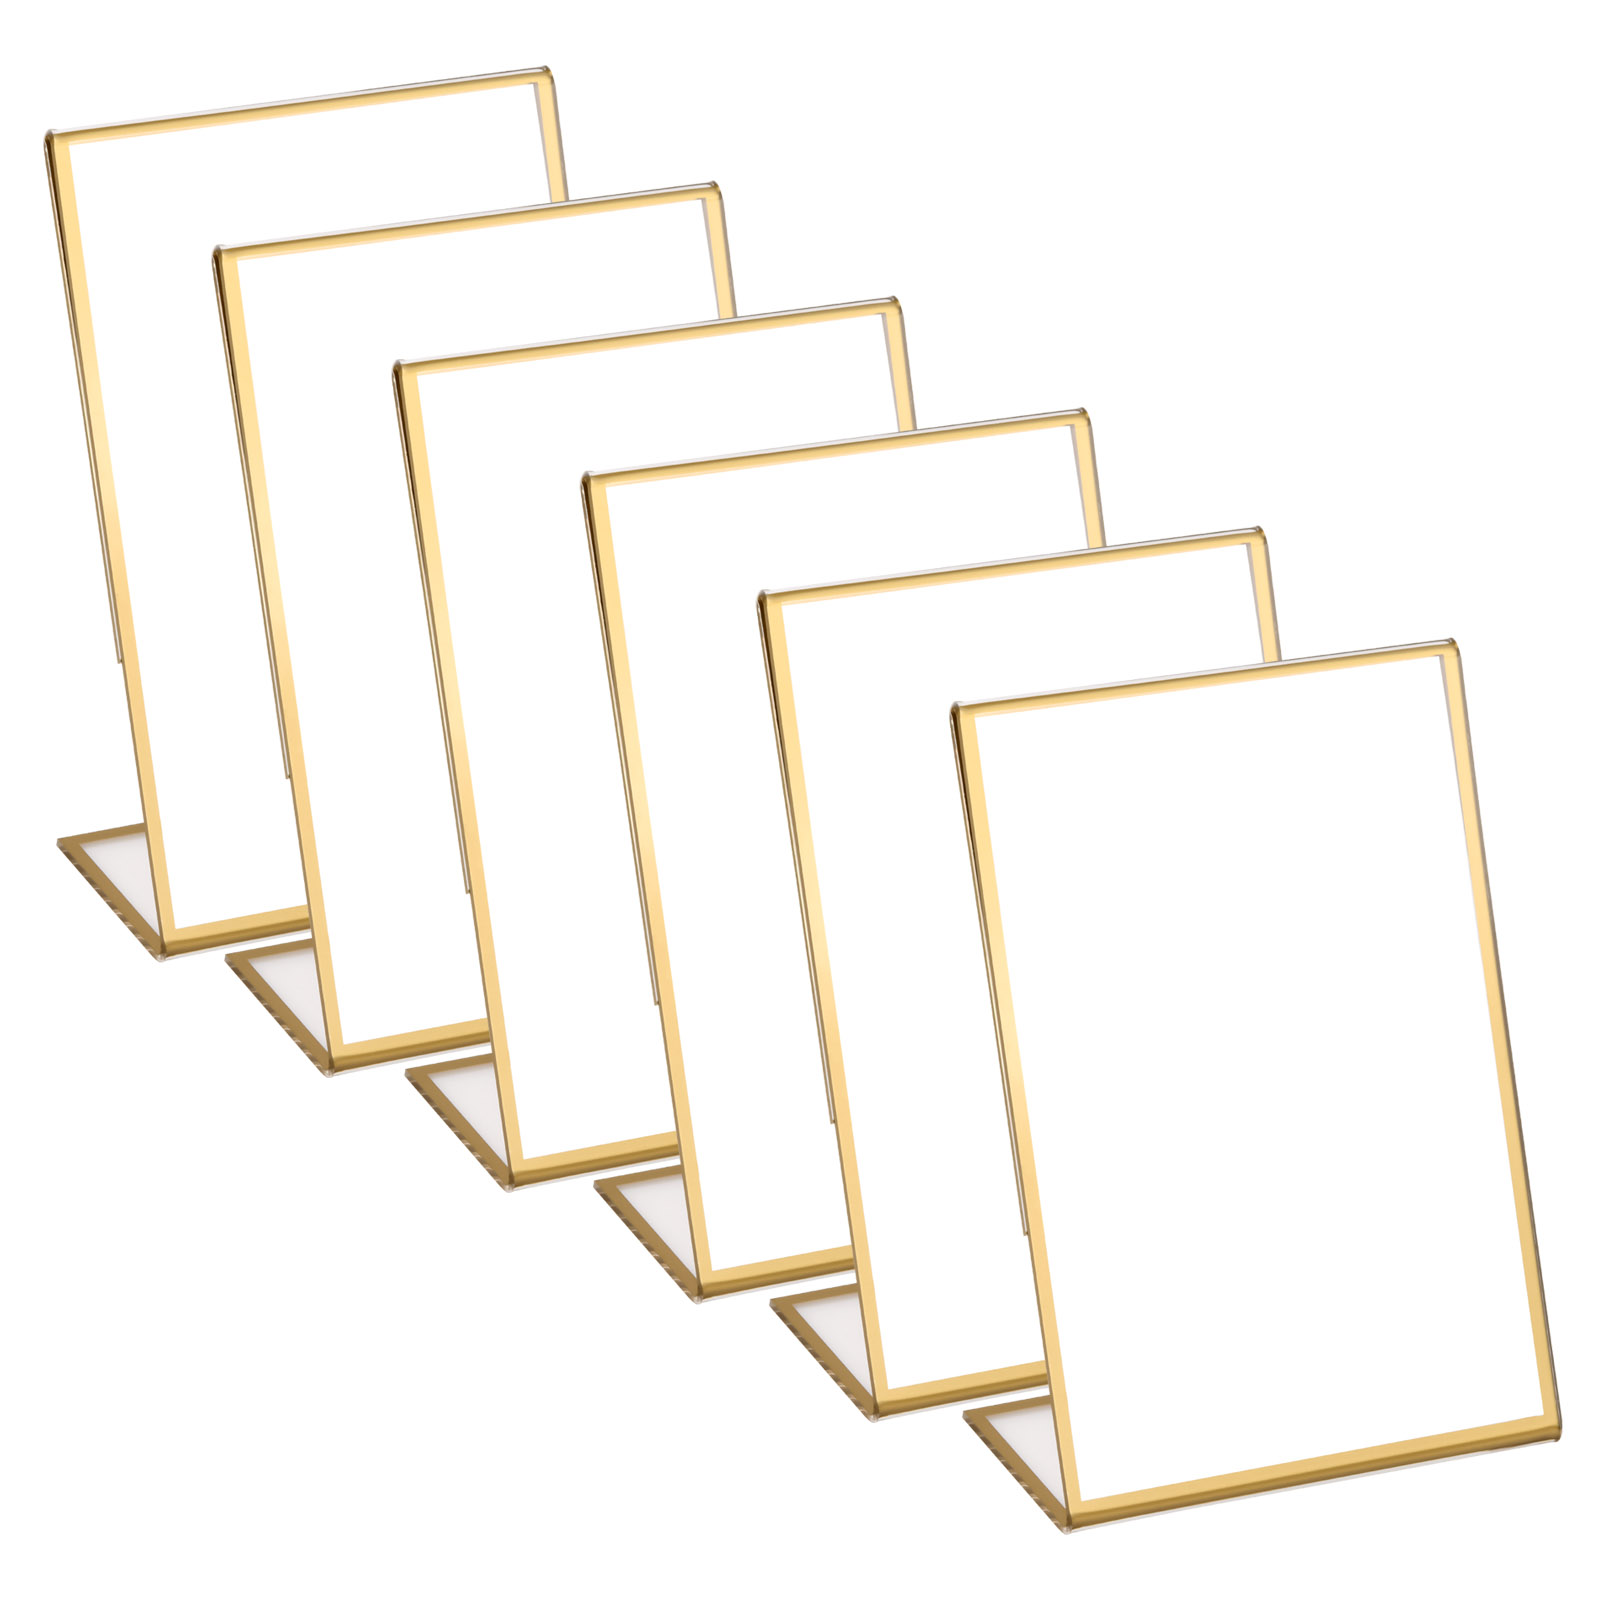 6Pack 4x6 Acrylic Sign Holder with Gold Frames and Kuwait